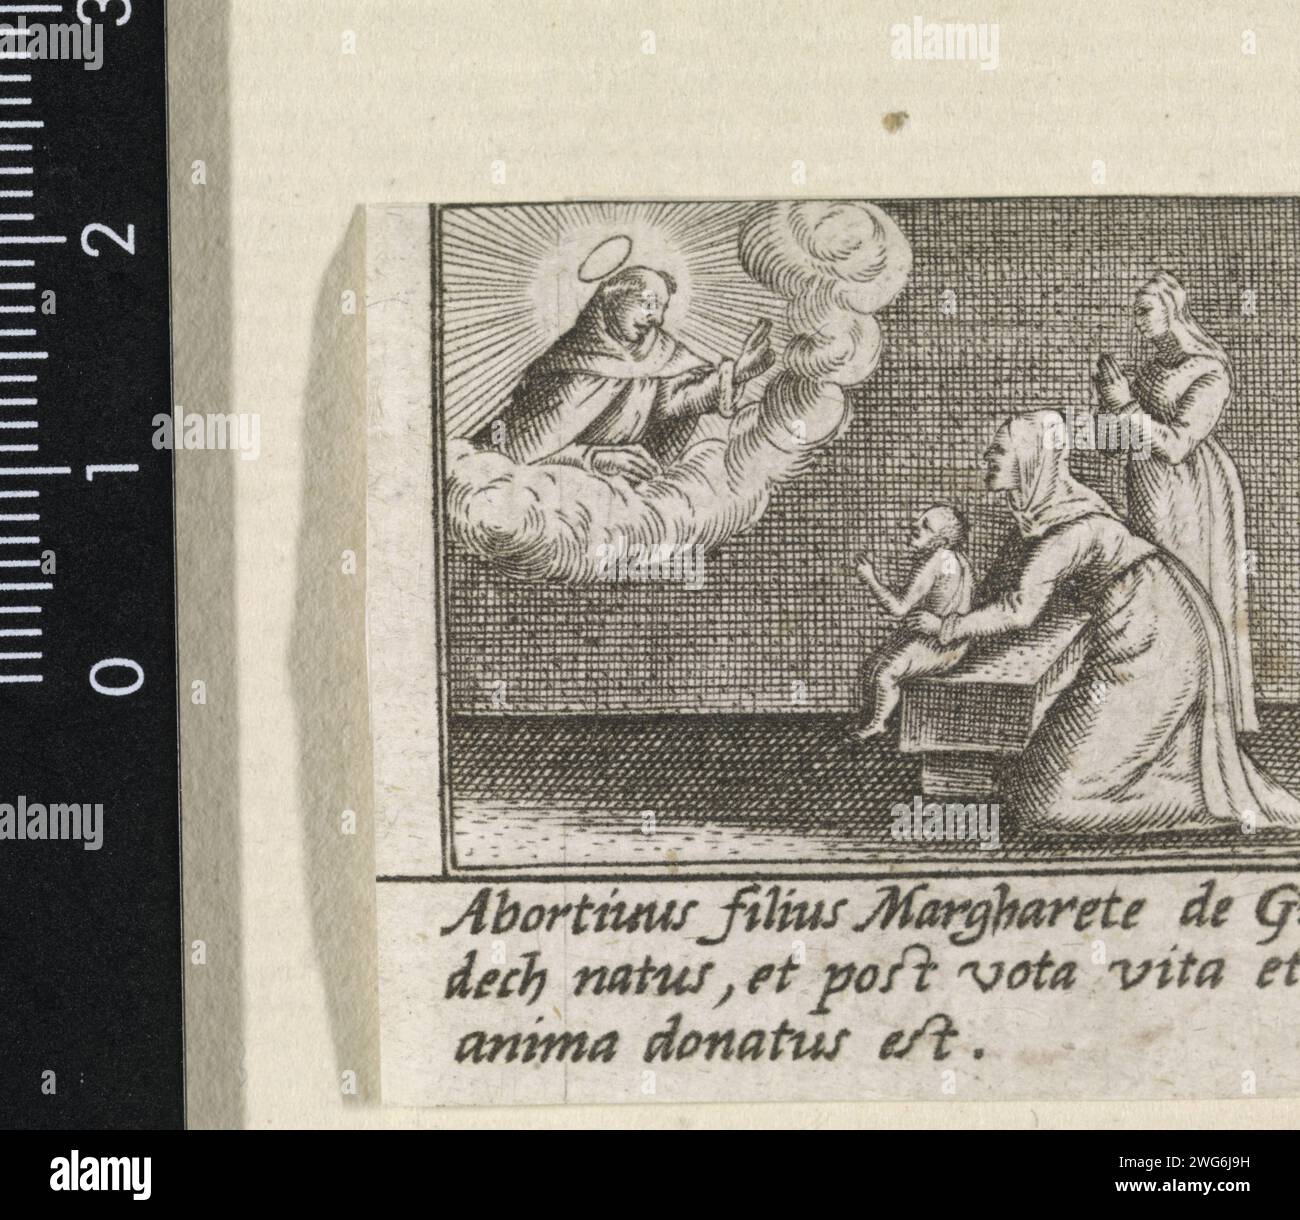 Presentation of a young child on the Holy Hyacinthus van Polen, Anonymous (Possibly), Johann Sadeler (I) (Possible), 1595 - 1600 print Two women present a child to the H. Hyacinthus van Polen who appears in the clouds. The print is part of an eighteen -part series that forms a frame around an image of the H. Hyacinthus van Polen. Venice paper engraving the Dominican friar Hyacinth(us) of Poland; possible attributes: book, lily, monstrance (or ciborium), statue of the Virgin - posthumous deeds, appearances of male saints. monk(s), friar(s). mother and baby or young child Stock Photo